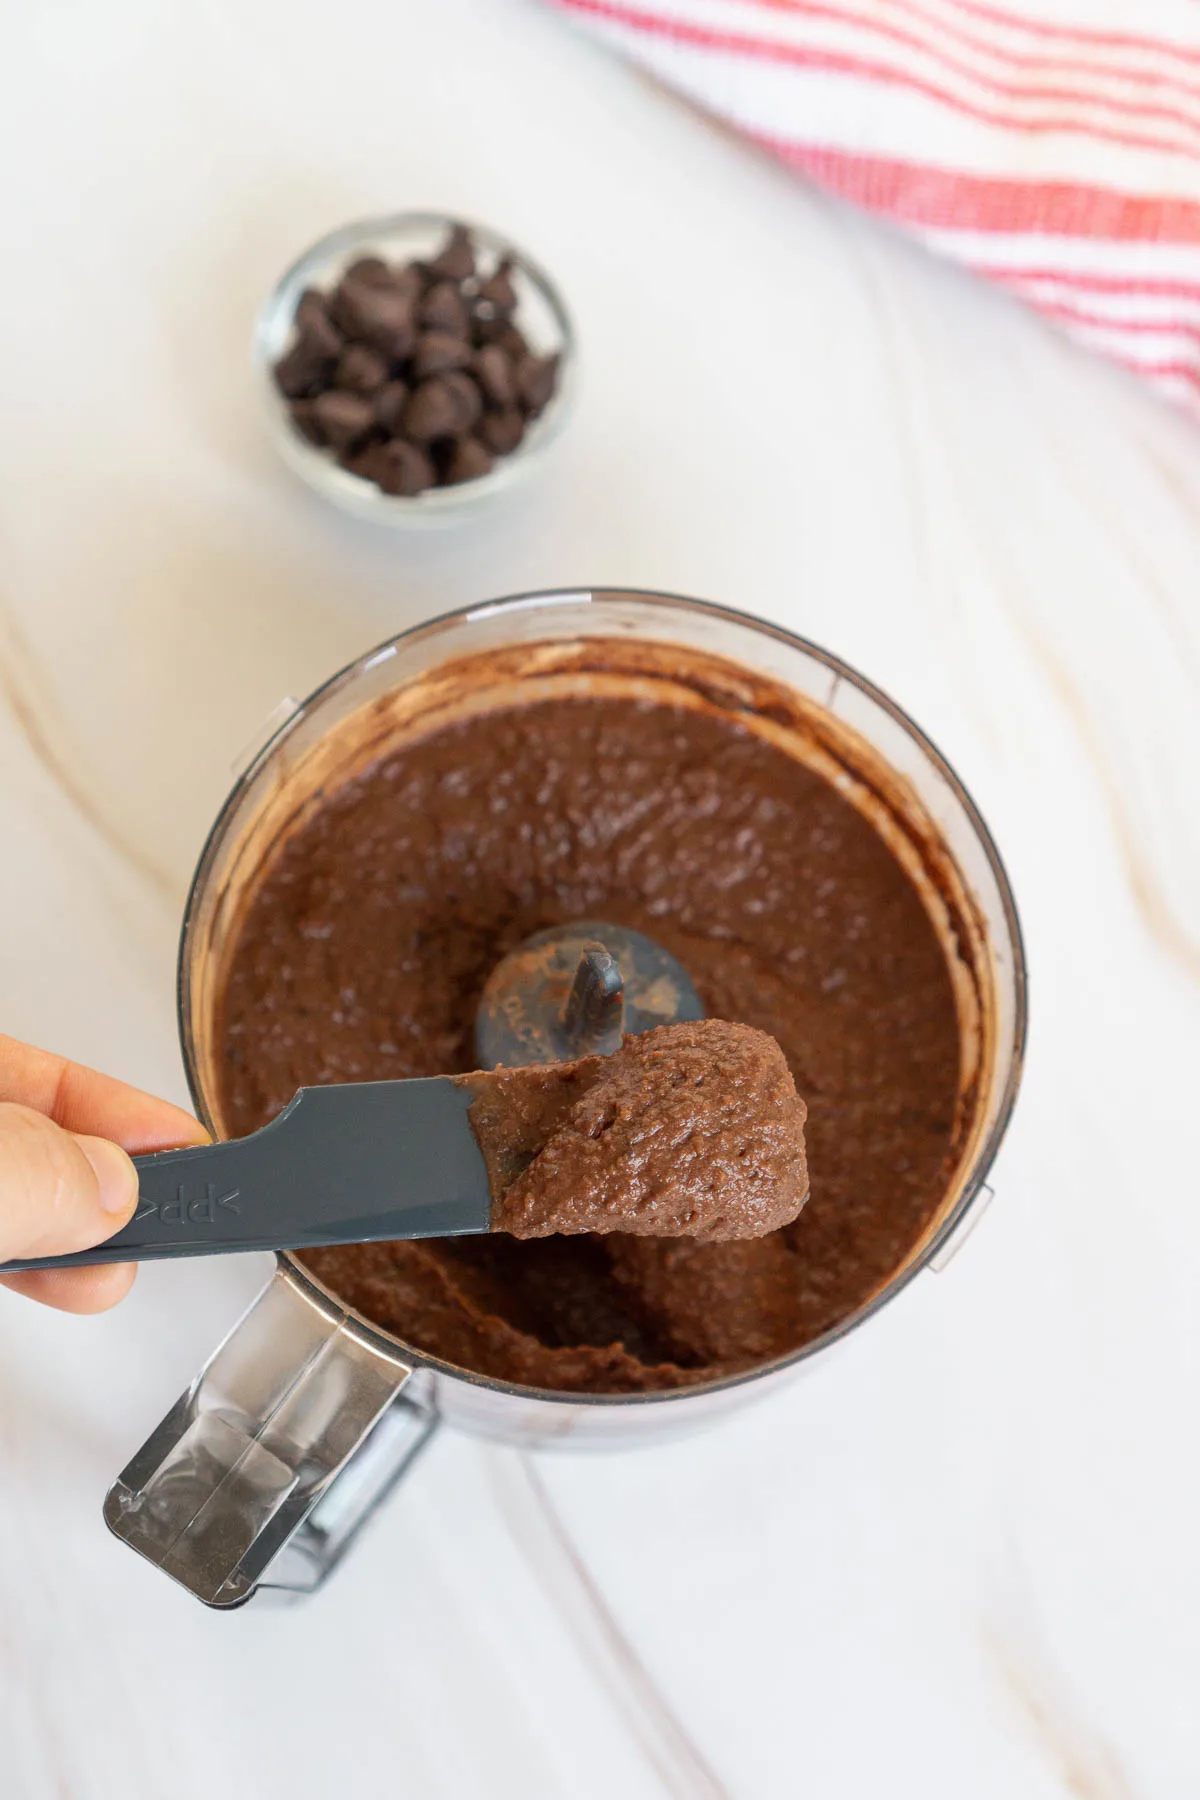 A small spatula showing the texture of chocolate hummus after blending.